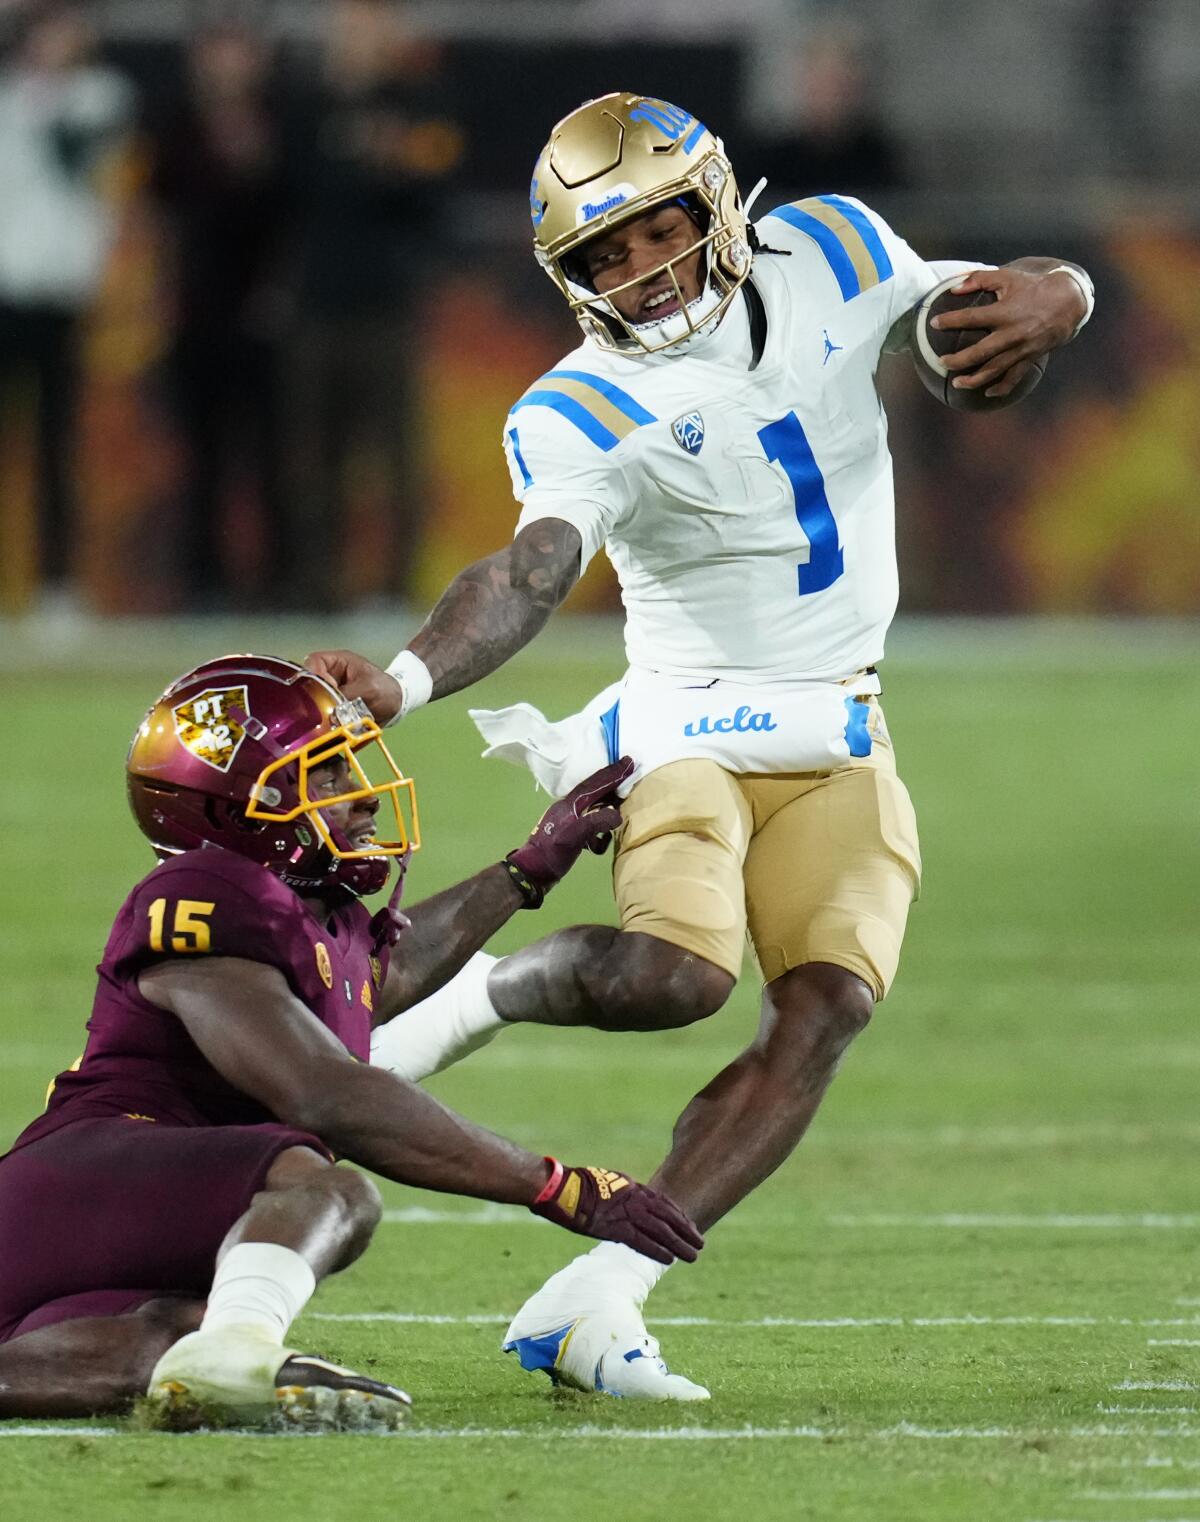 UCLA quarterback Dorian Thompson-Robinson (1) gets stopped by Arizona State defensive back Khoury Bethley (15) during the second half of an NCAA college football game in Tempe, Ariz., Saturday, Nov. 5, 2022. UCLA won 50-36. (AP Photo/Ross D. Franklin)